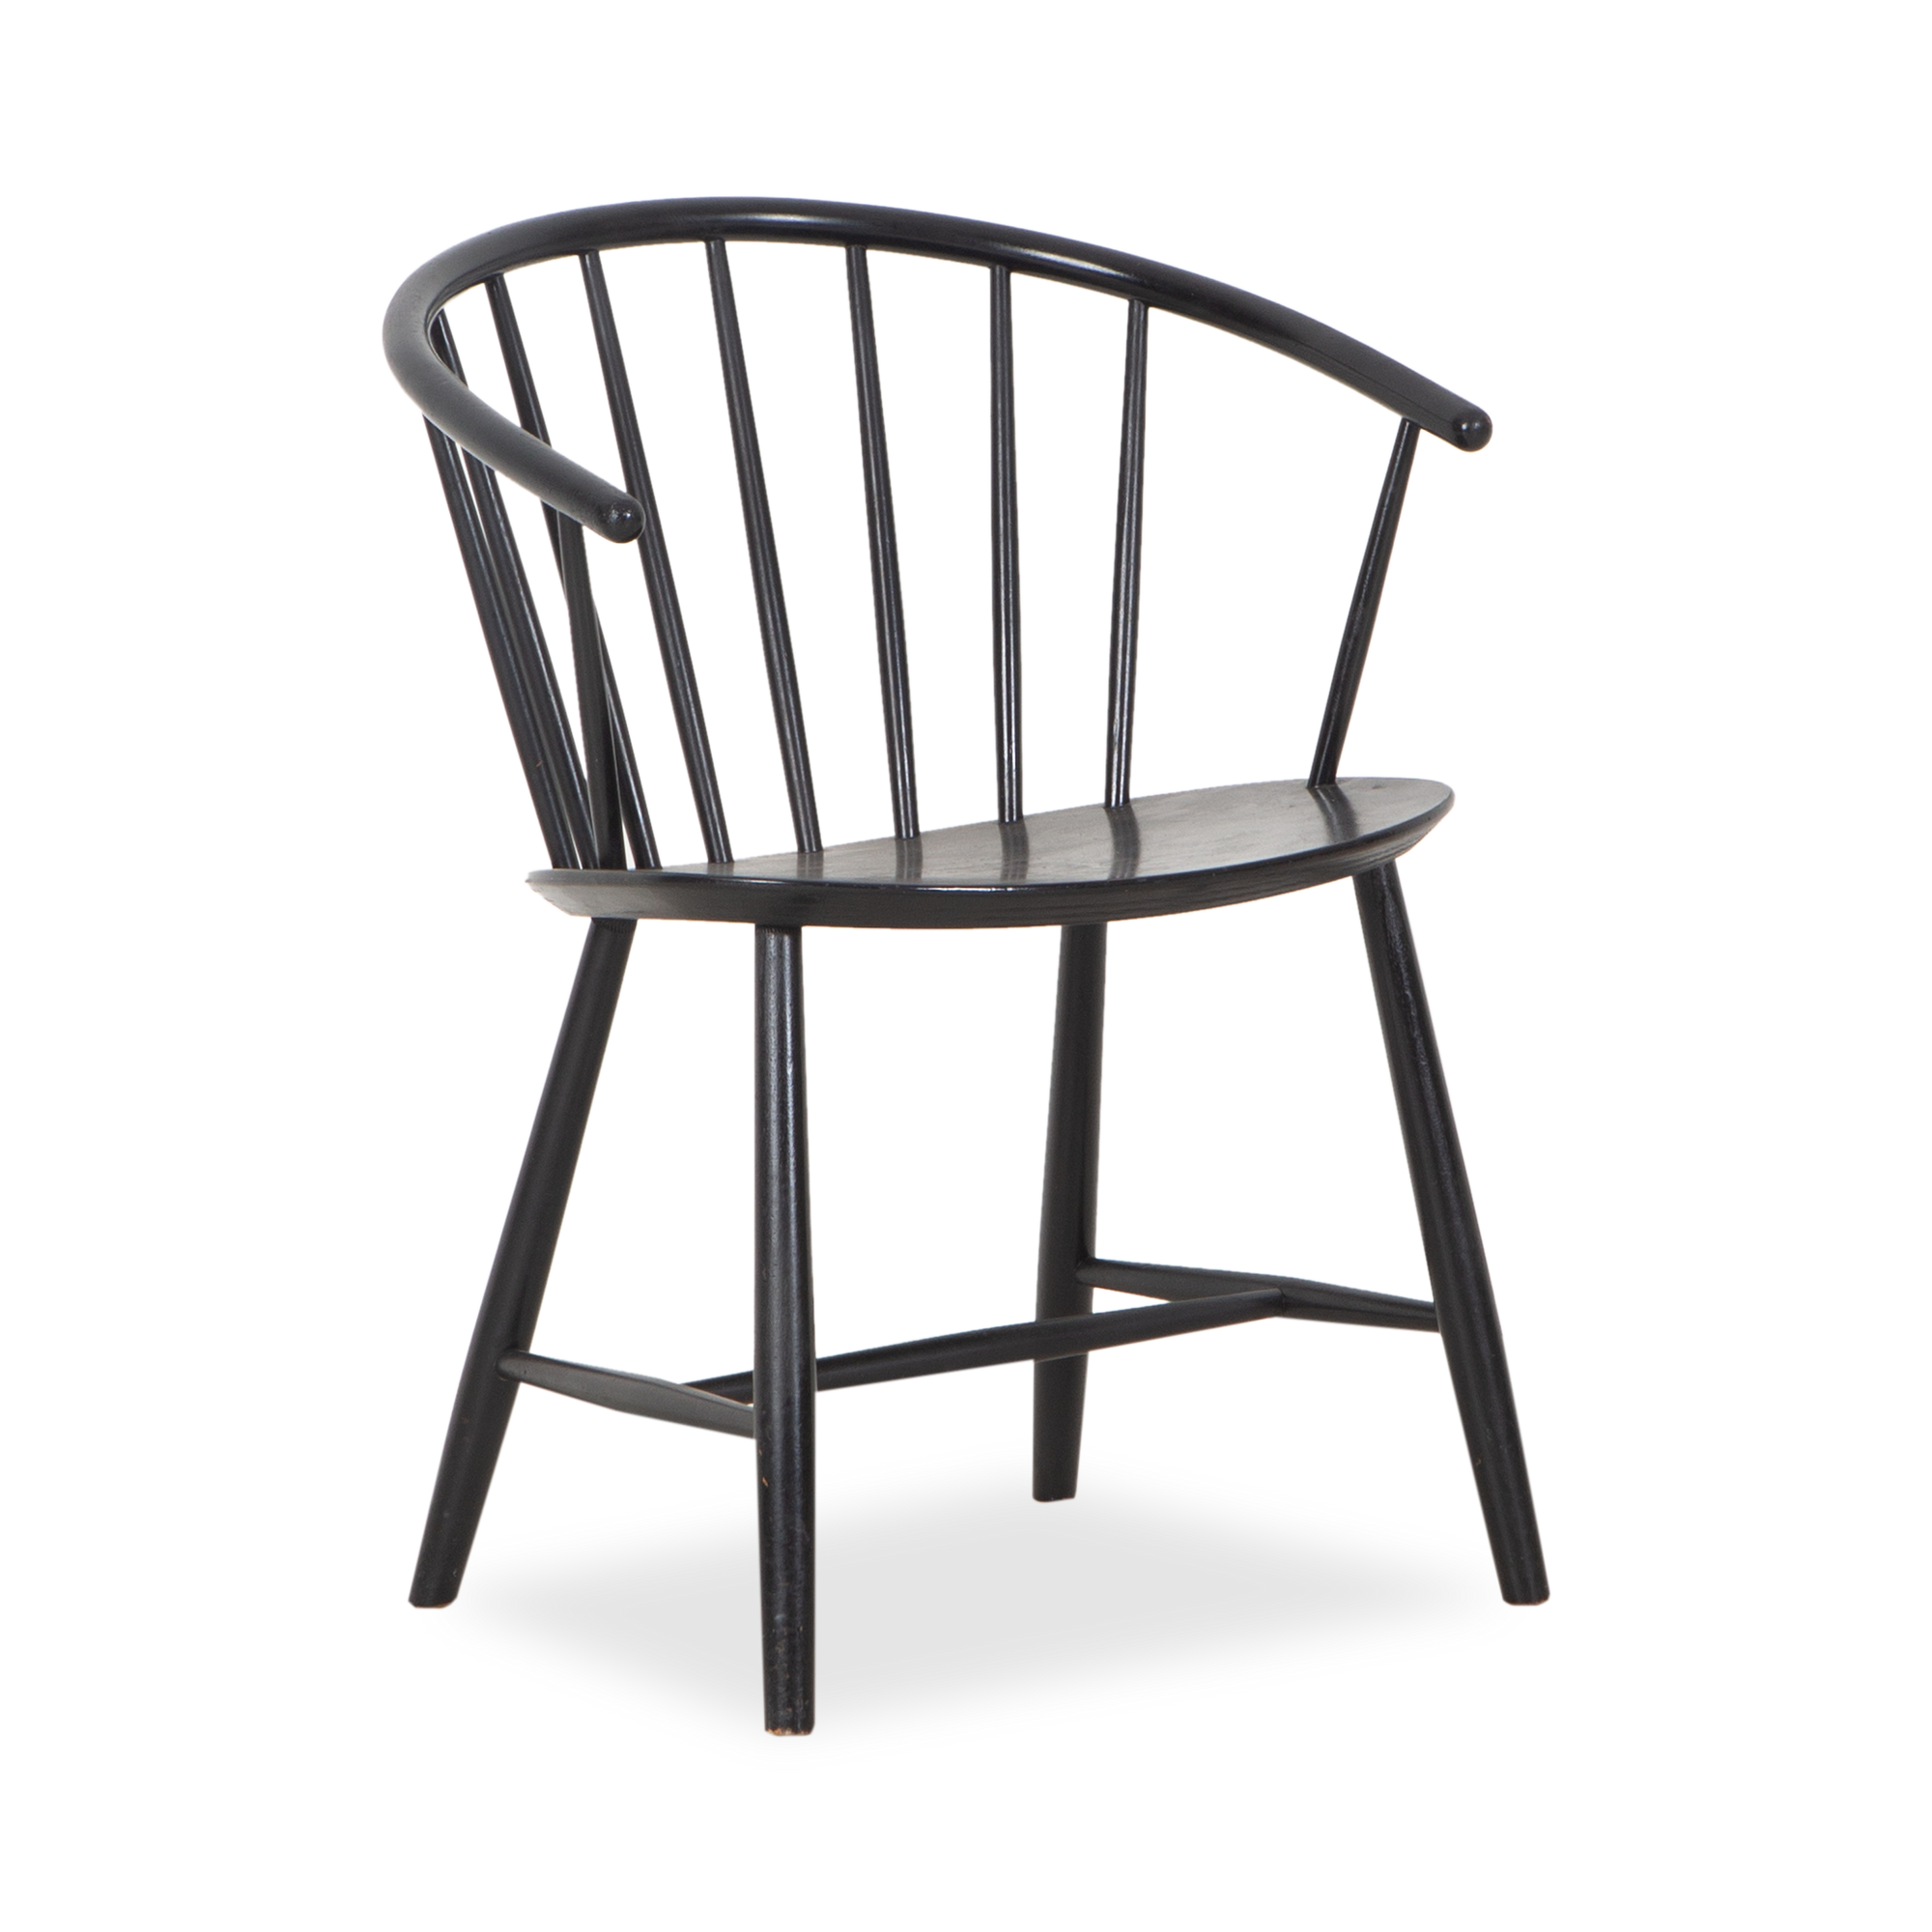 An iconic spindle-back piece, this vintage J64 Chair was designed by Ejvind Johansson and manufactured by Fredericia Stolefabrik, circa 1960s.